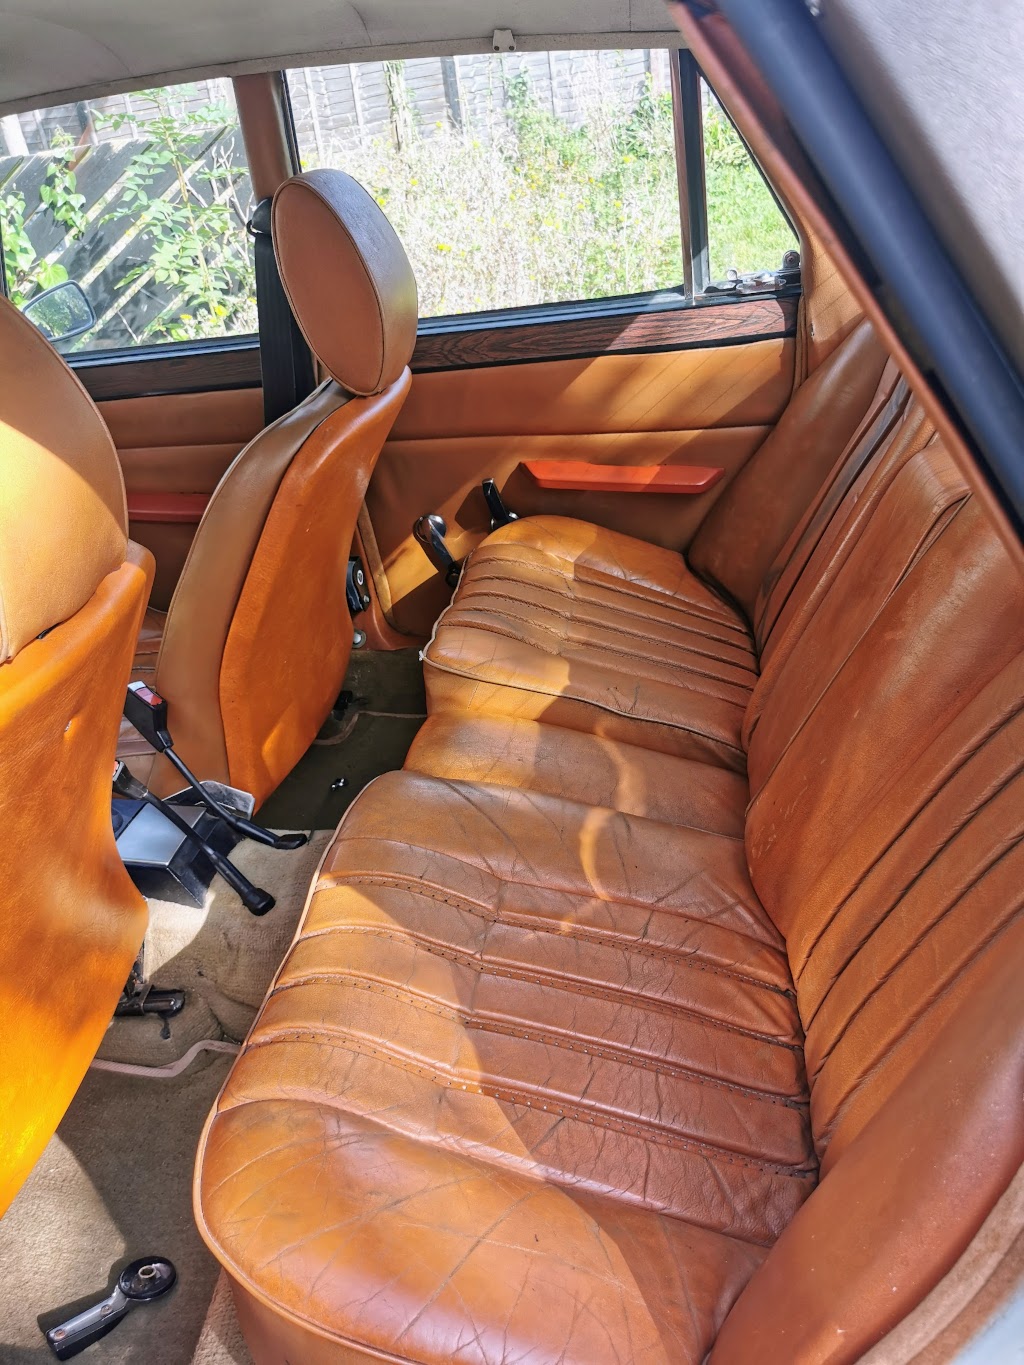 Overview of rear interior of a 1975 Rover P6 3500